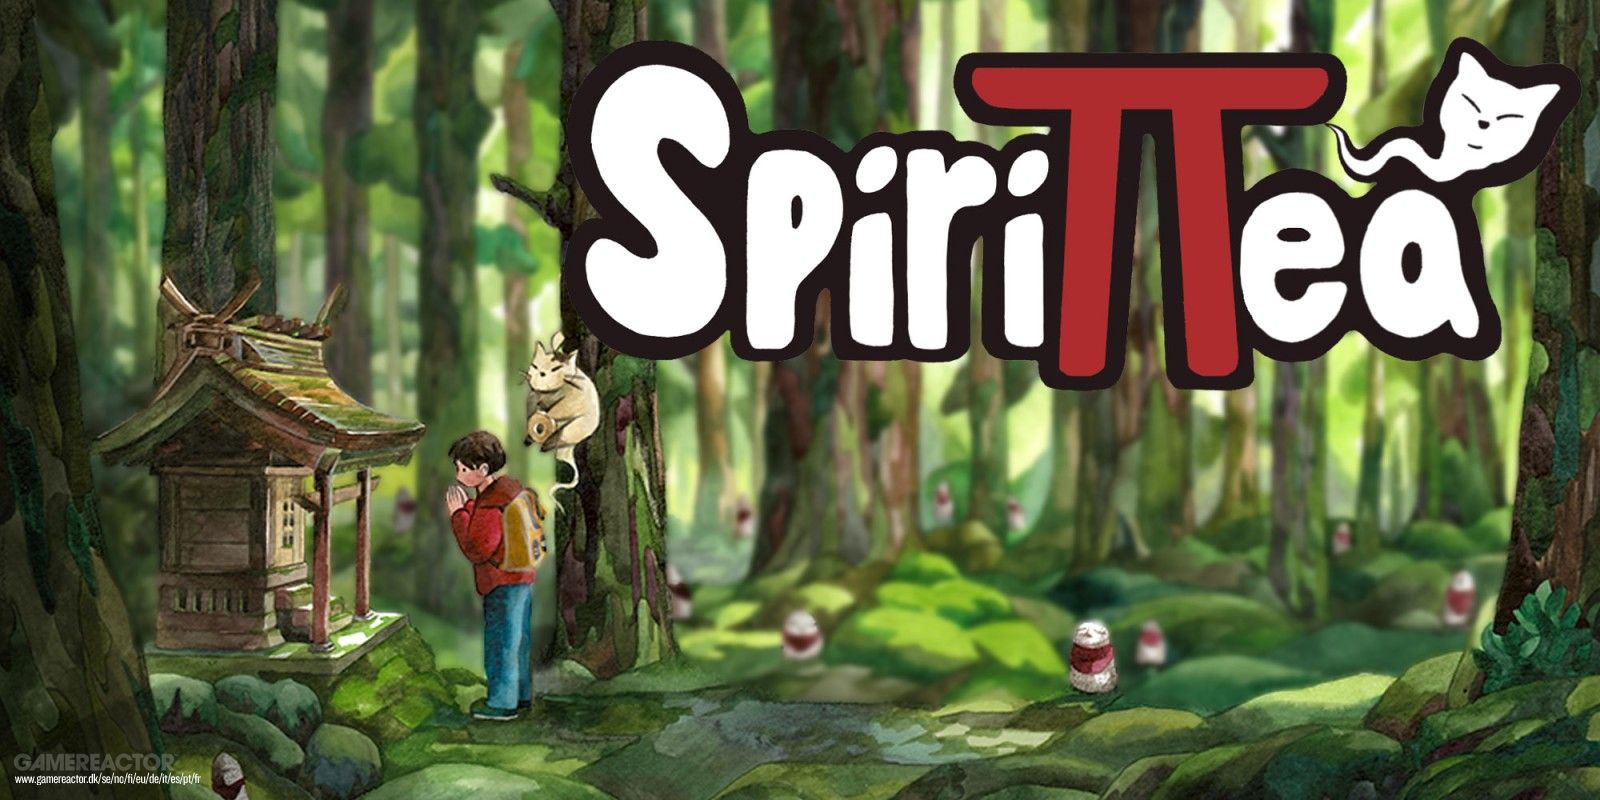 Spirittea has “over 100 hours of content” thanks to Game Pass